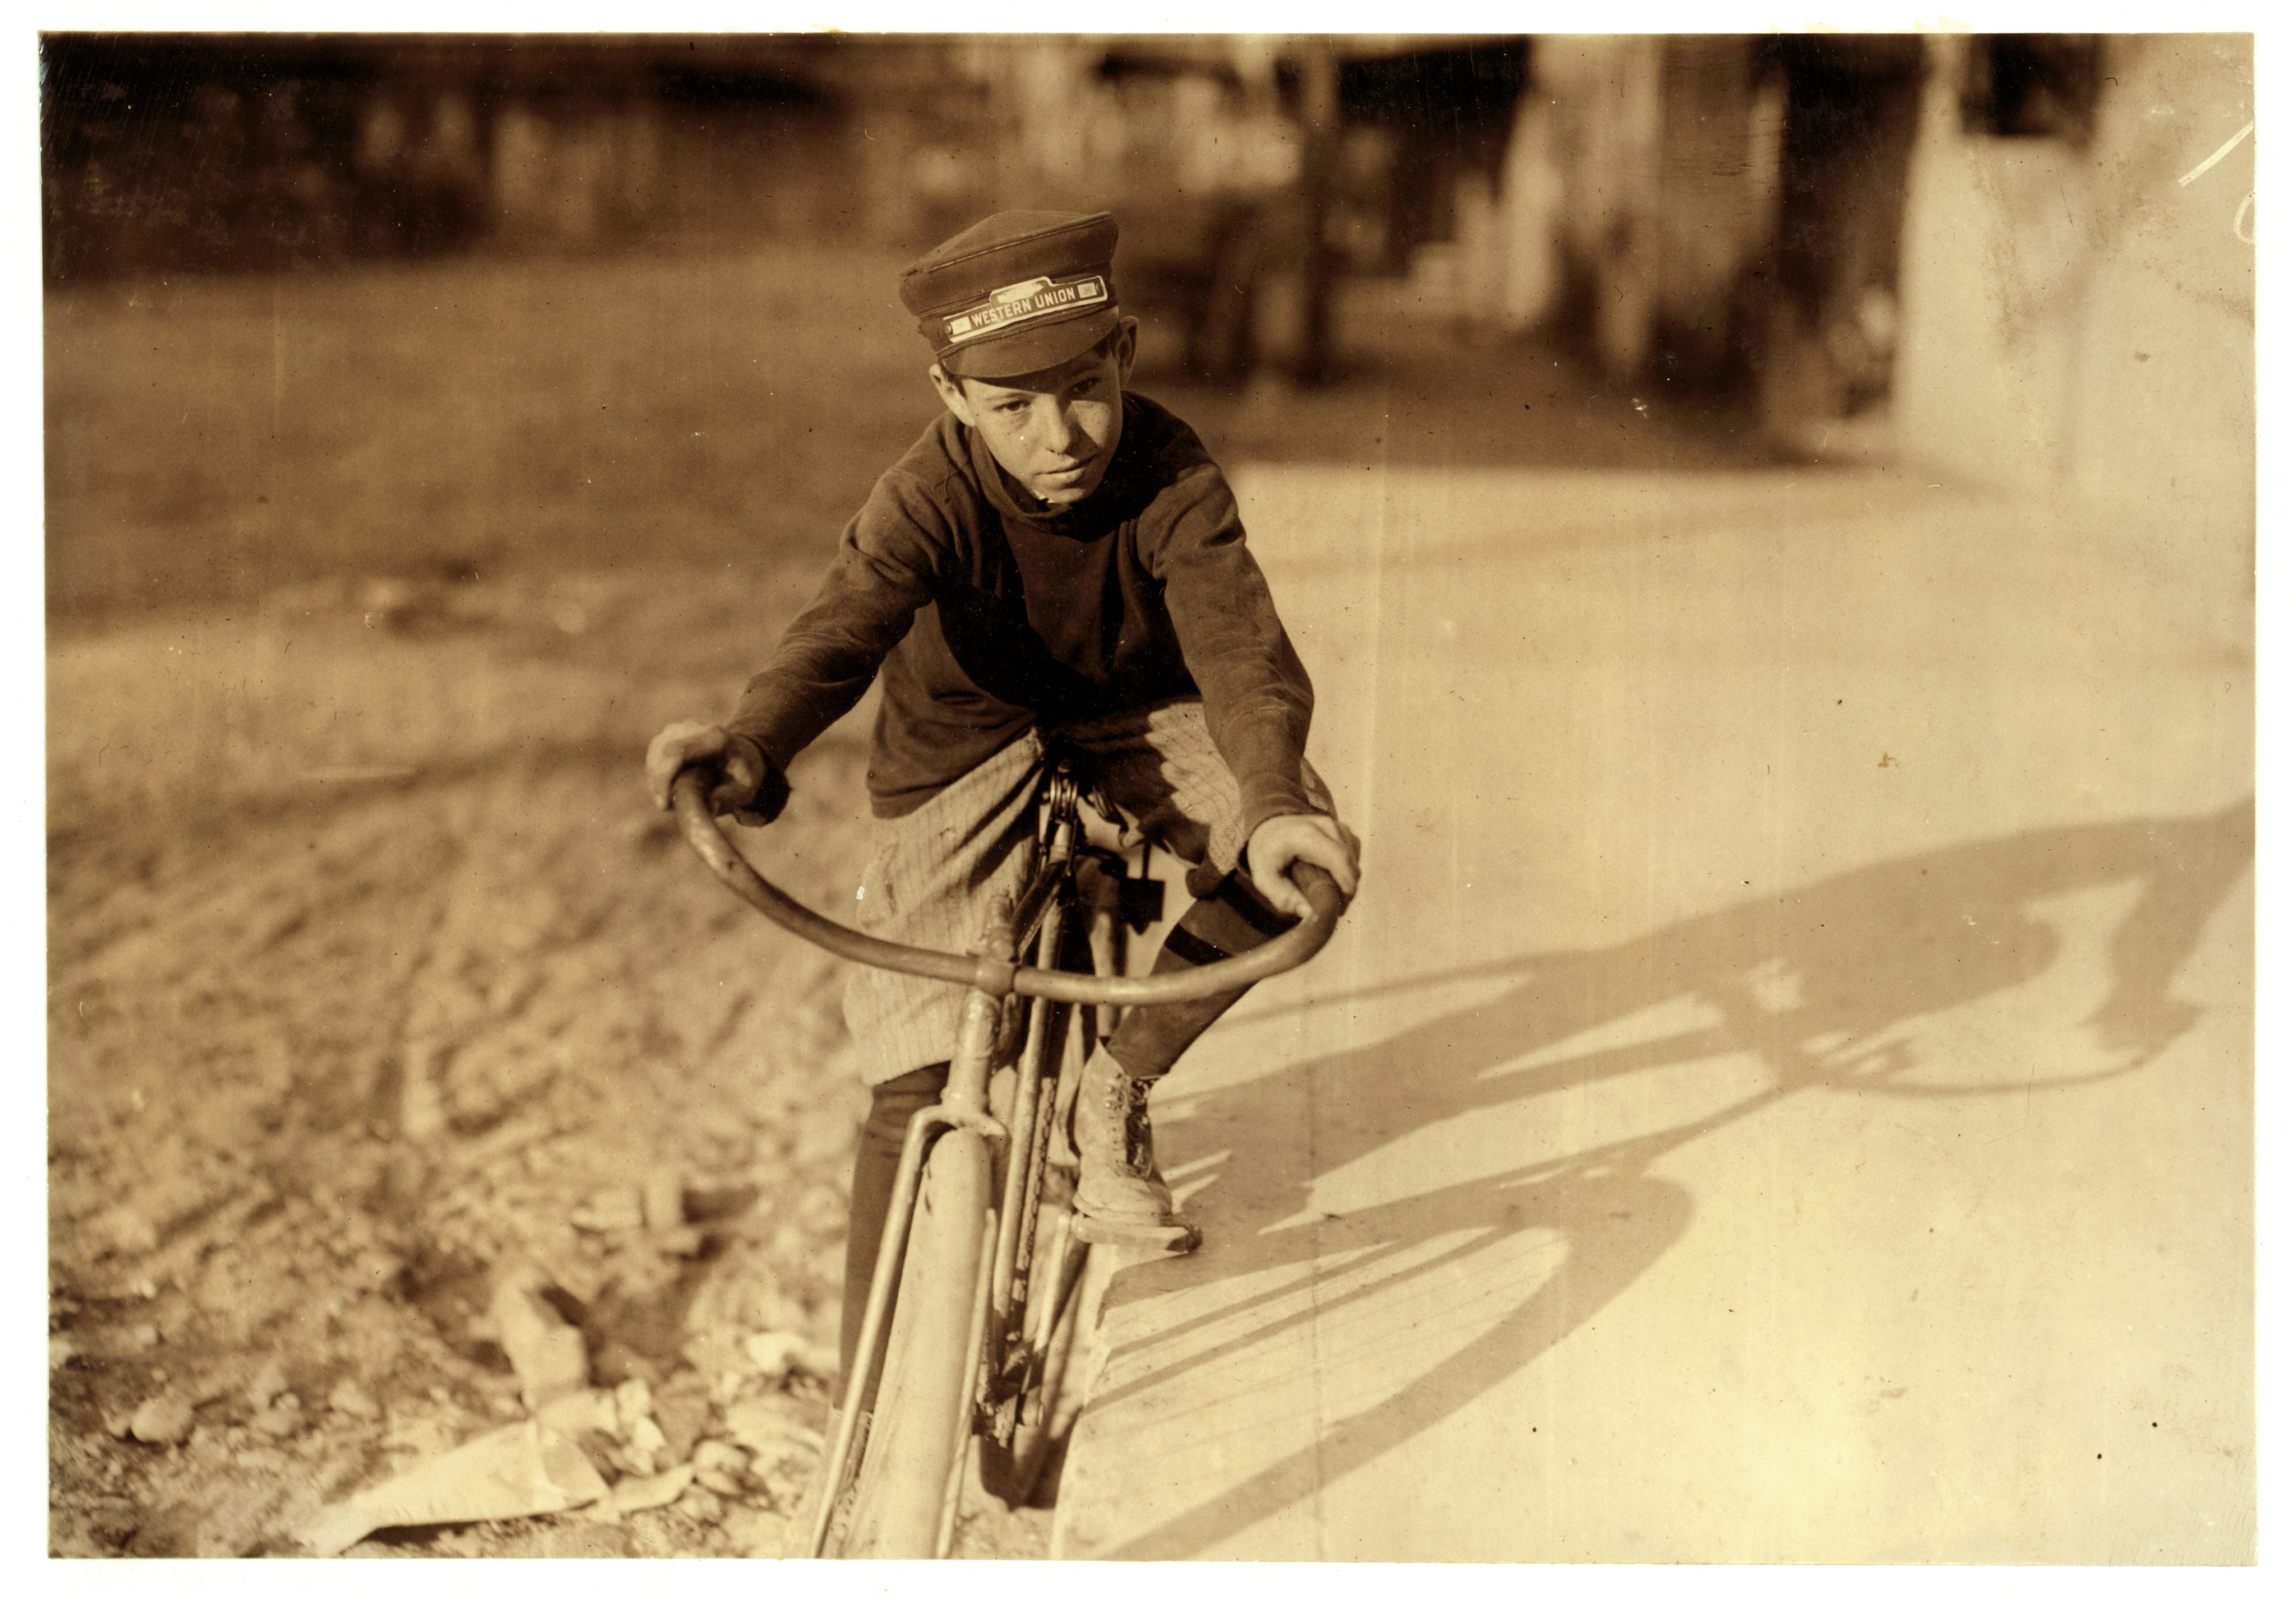 Lewis Hine, Curtin Hines, 14 years old, Western Union messenger, Houston, Texas, 1913